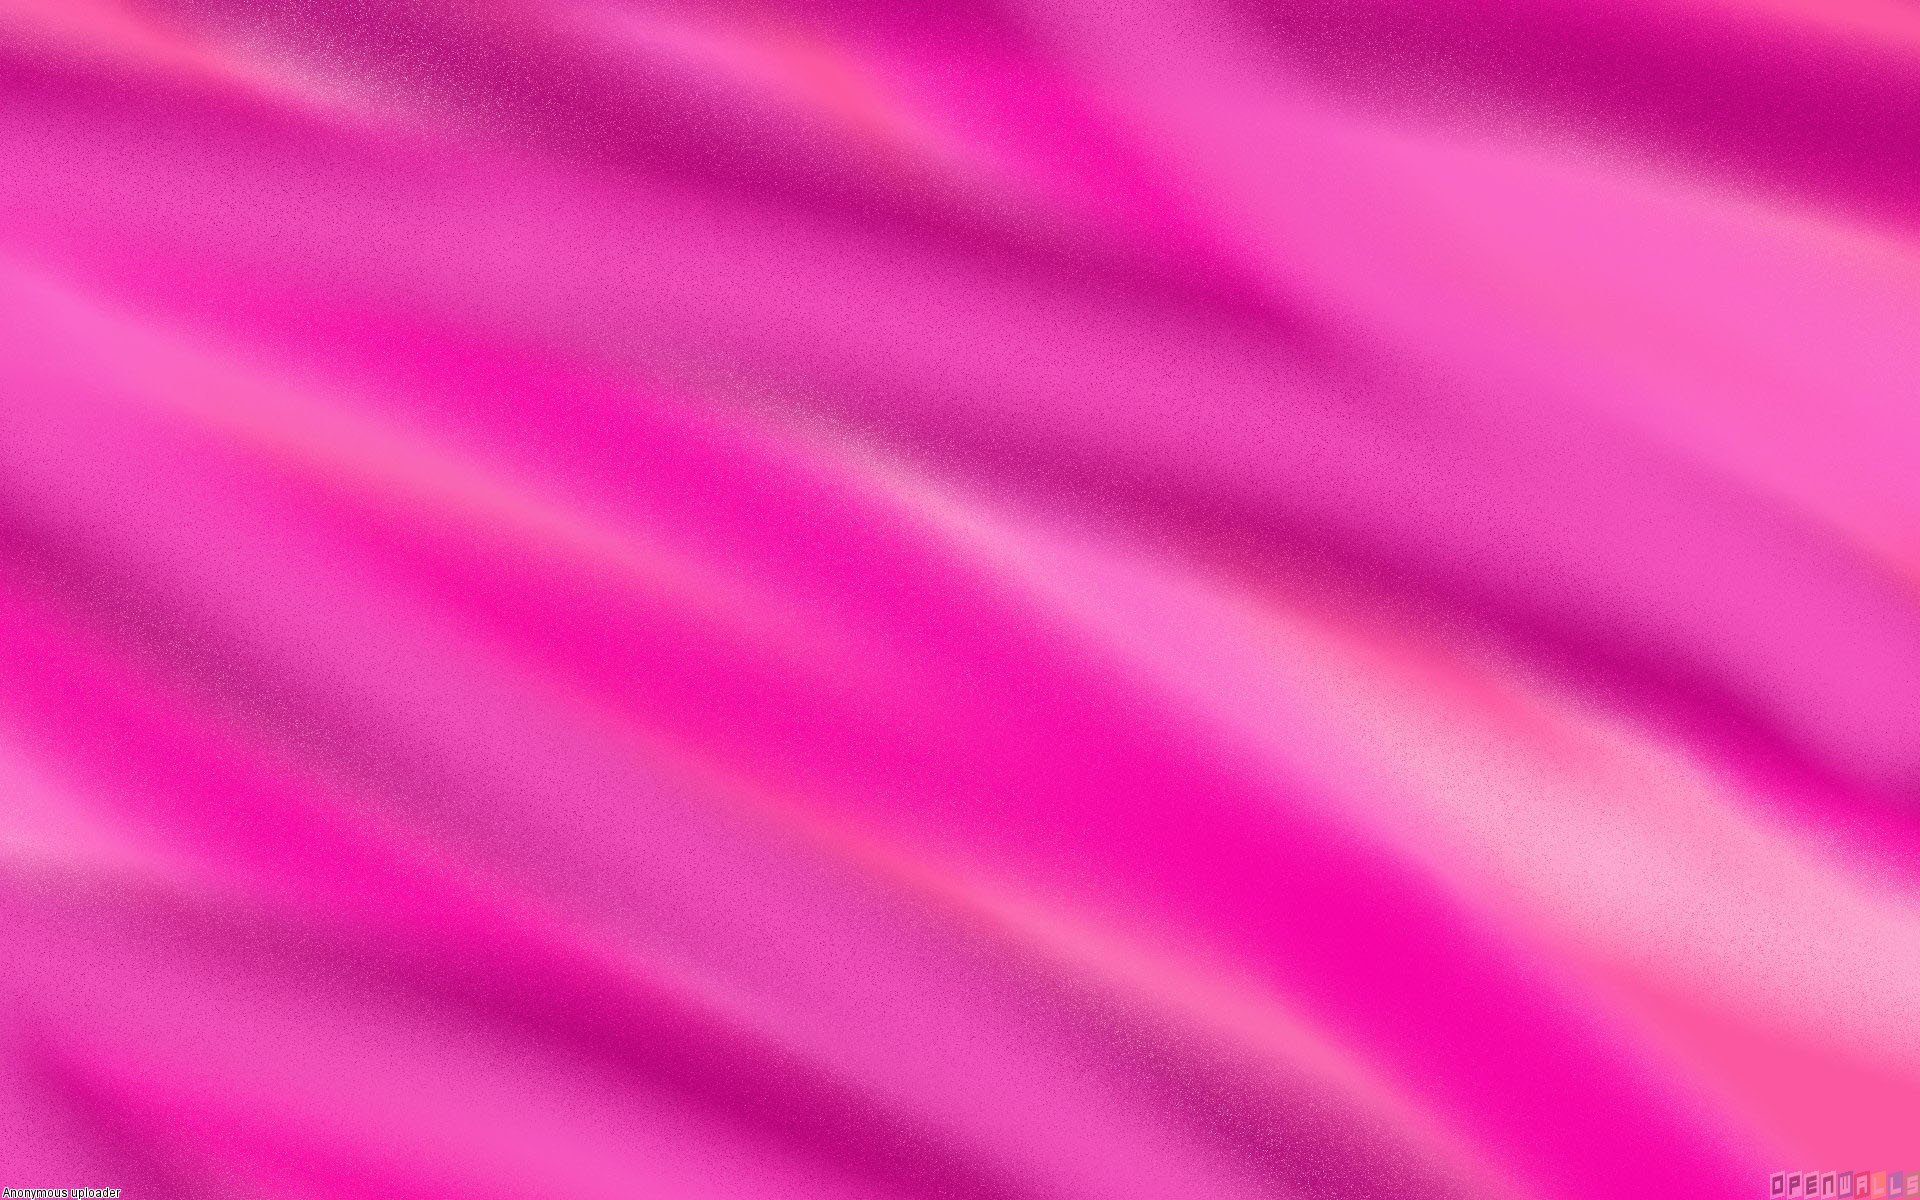 background image pink images wallpaper 1920x1200